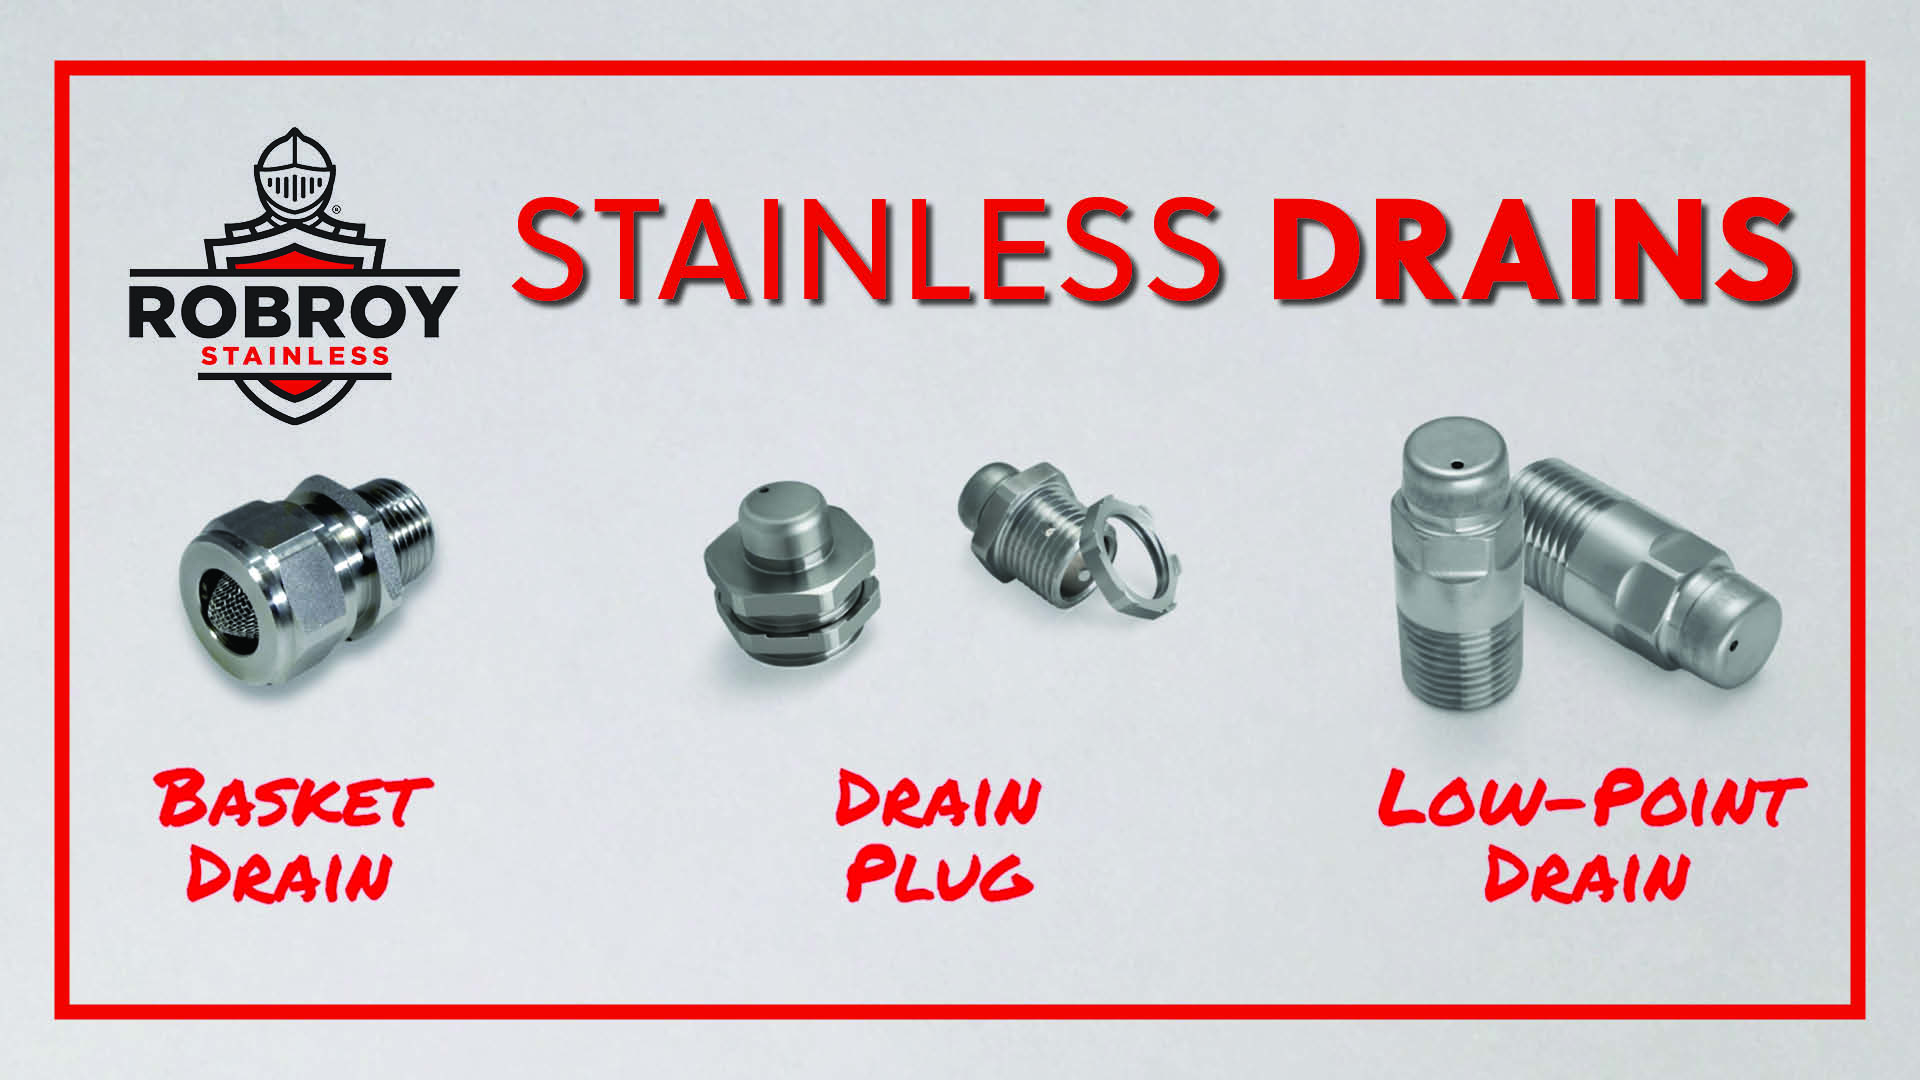 Robroy Stainless Drains